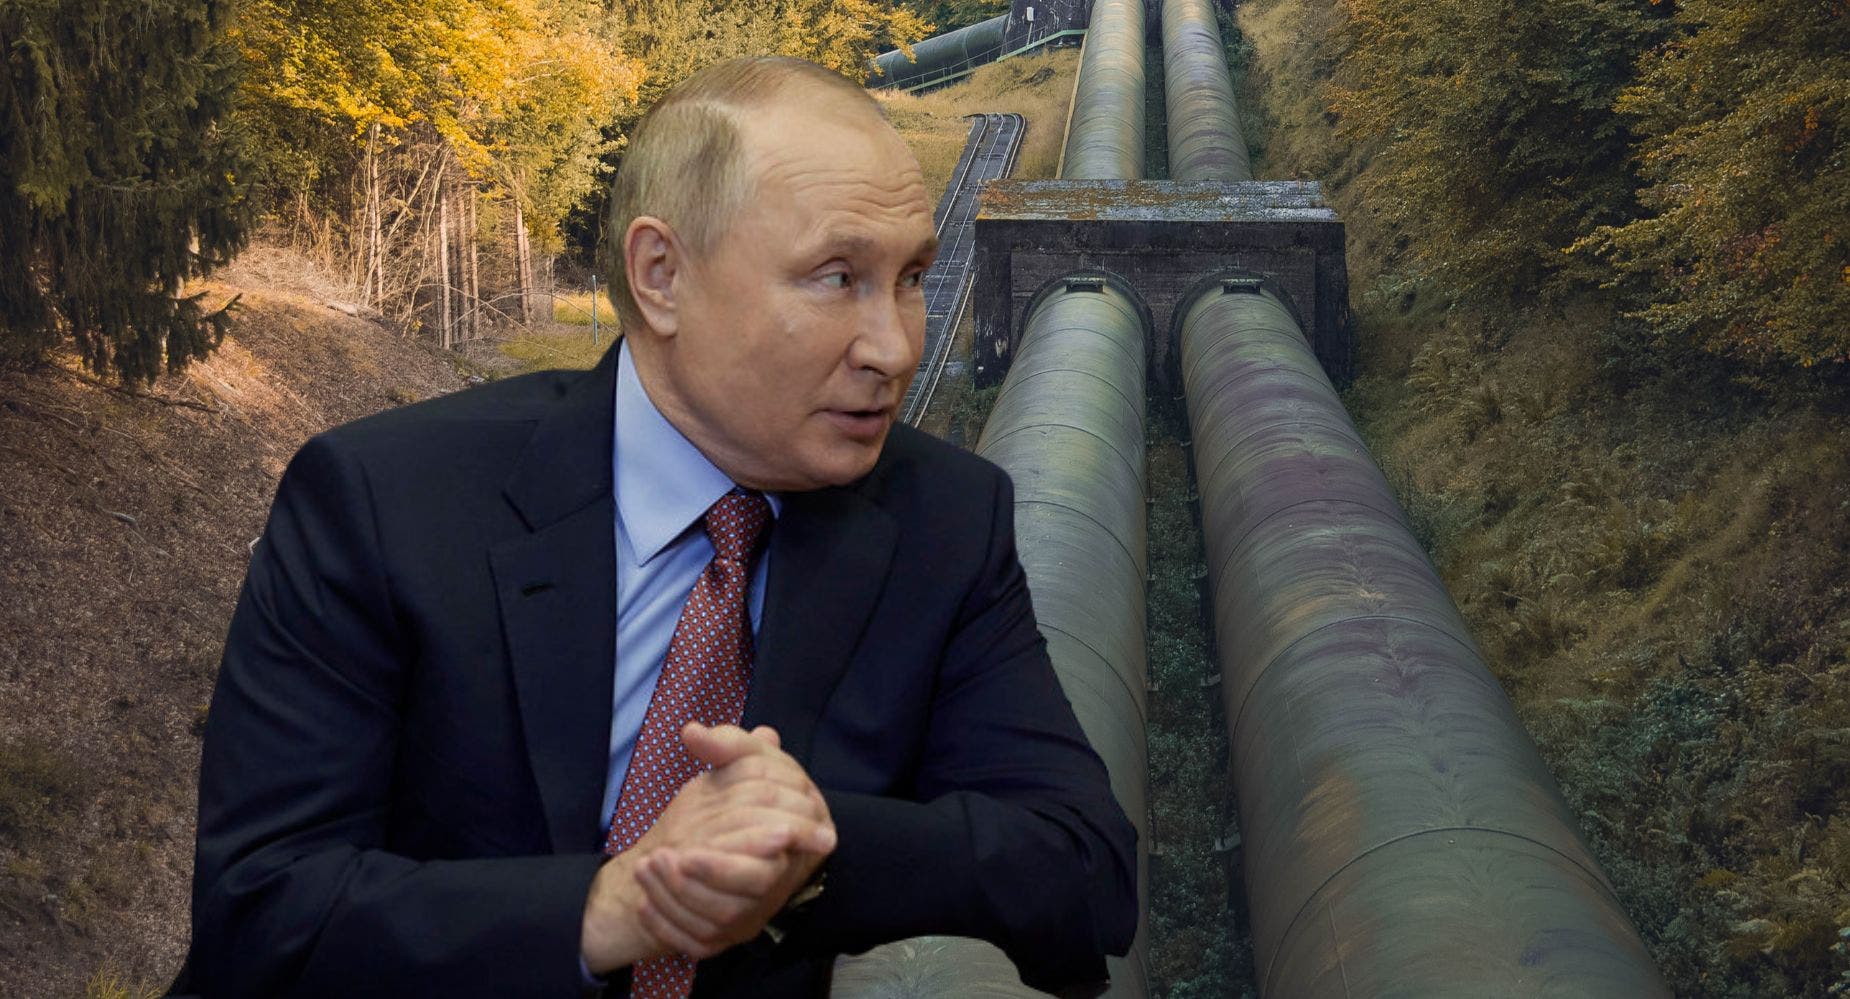 Putin Tells Europe To Undo Sanctions For Gas: 'If You Have An Urge, If It's So Hard For You, Just Lift The Sanctions'